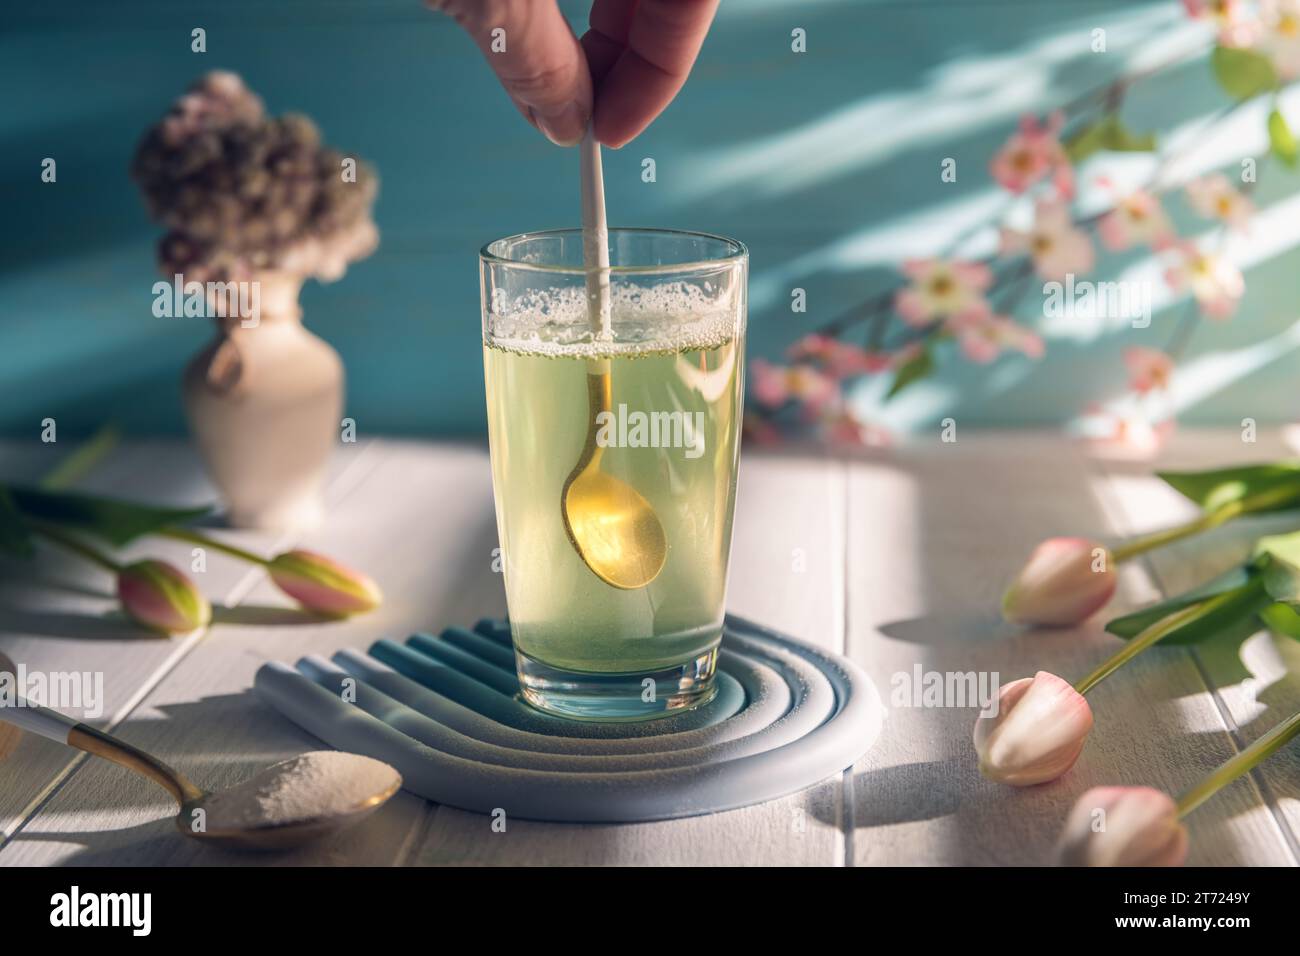 women's hand spoons collagen in a glass of water, Healthy and anti-age concept Stock Photo